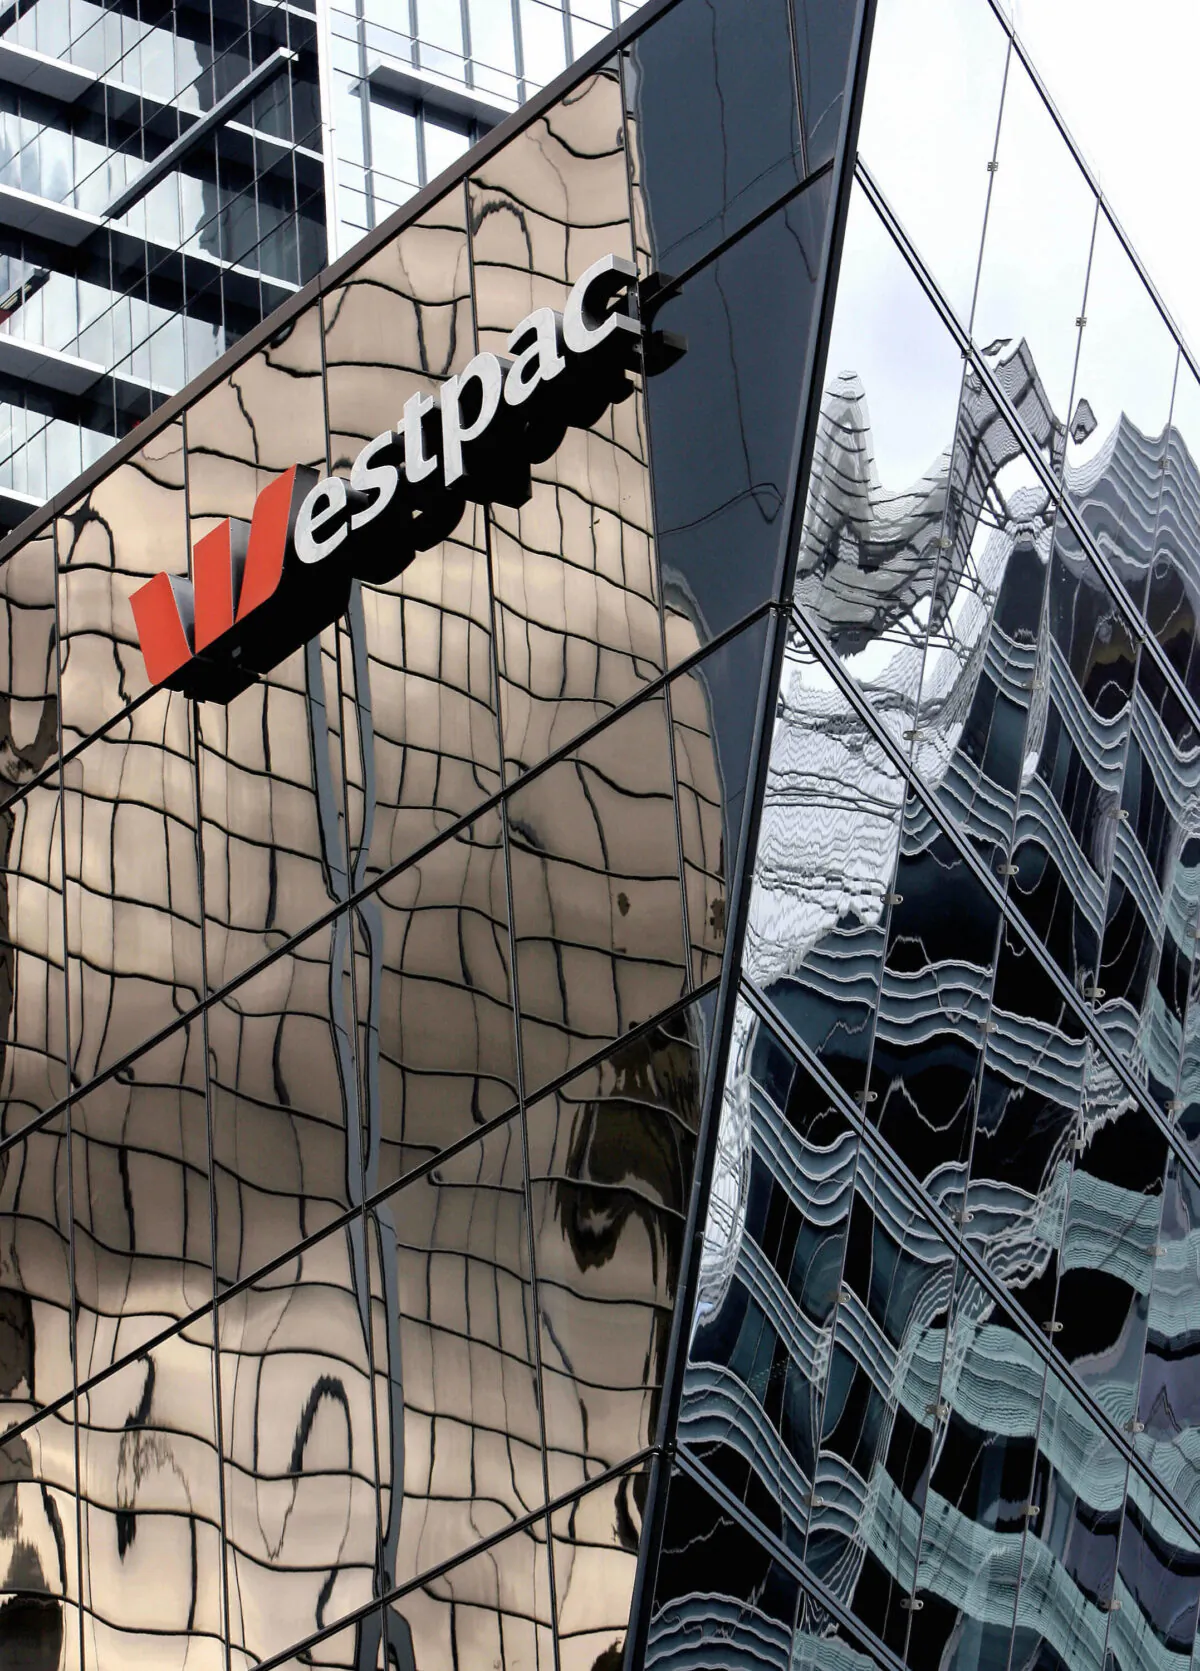 Westpac Bank signage is displayed on a building in this photo taken in Sydney, Australia, on 13 July 2006. (Greg Wood/AFP via Getty Images)